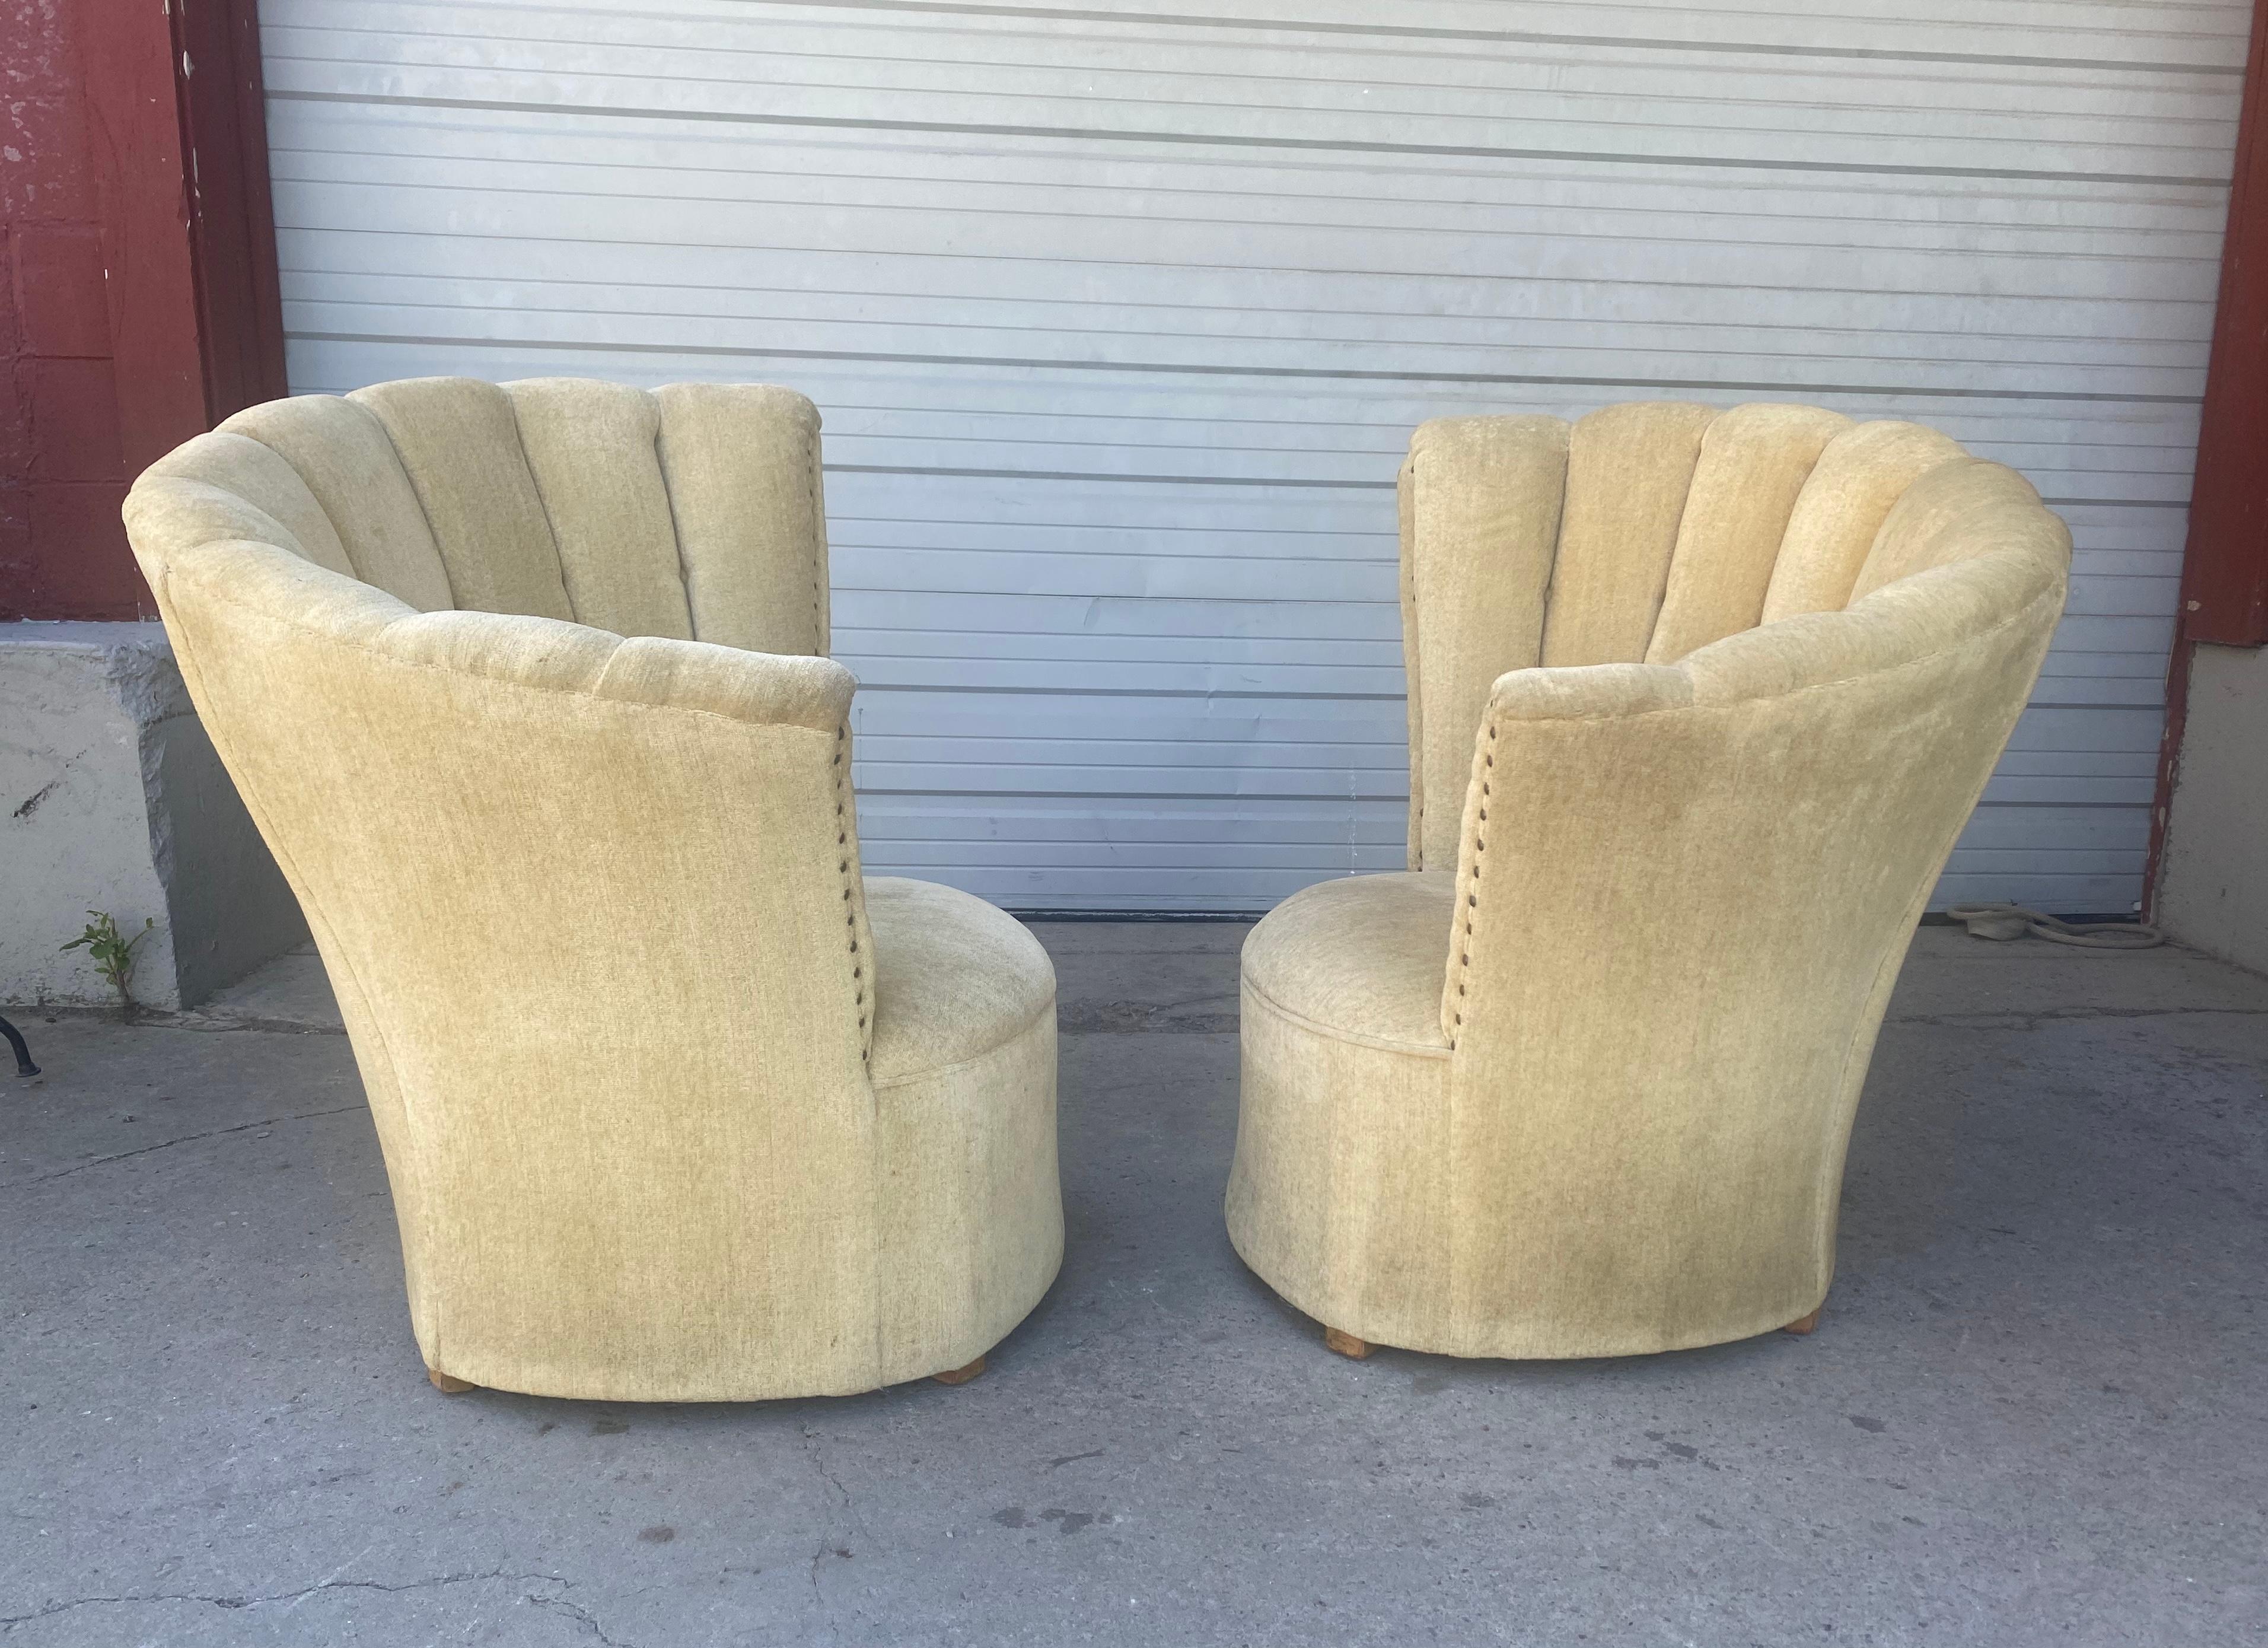 Matched Pair Asymmetrical Art Deco Lounge Chairs, Grosfeld House, Cream Mohair In Good Condition For Sale In Buffalo, NY